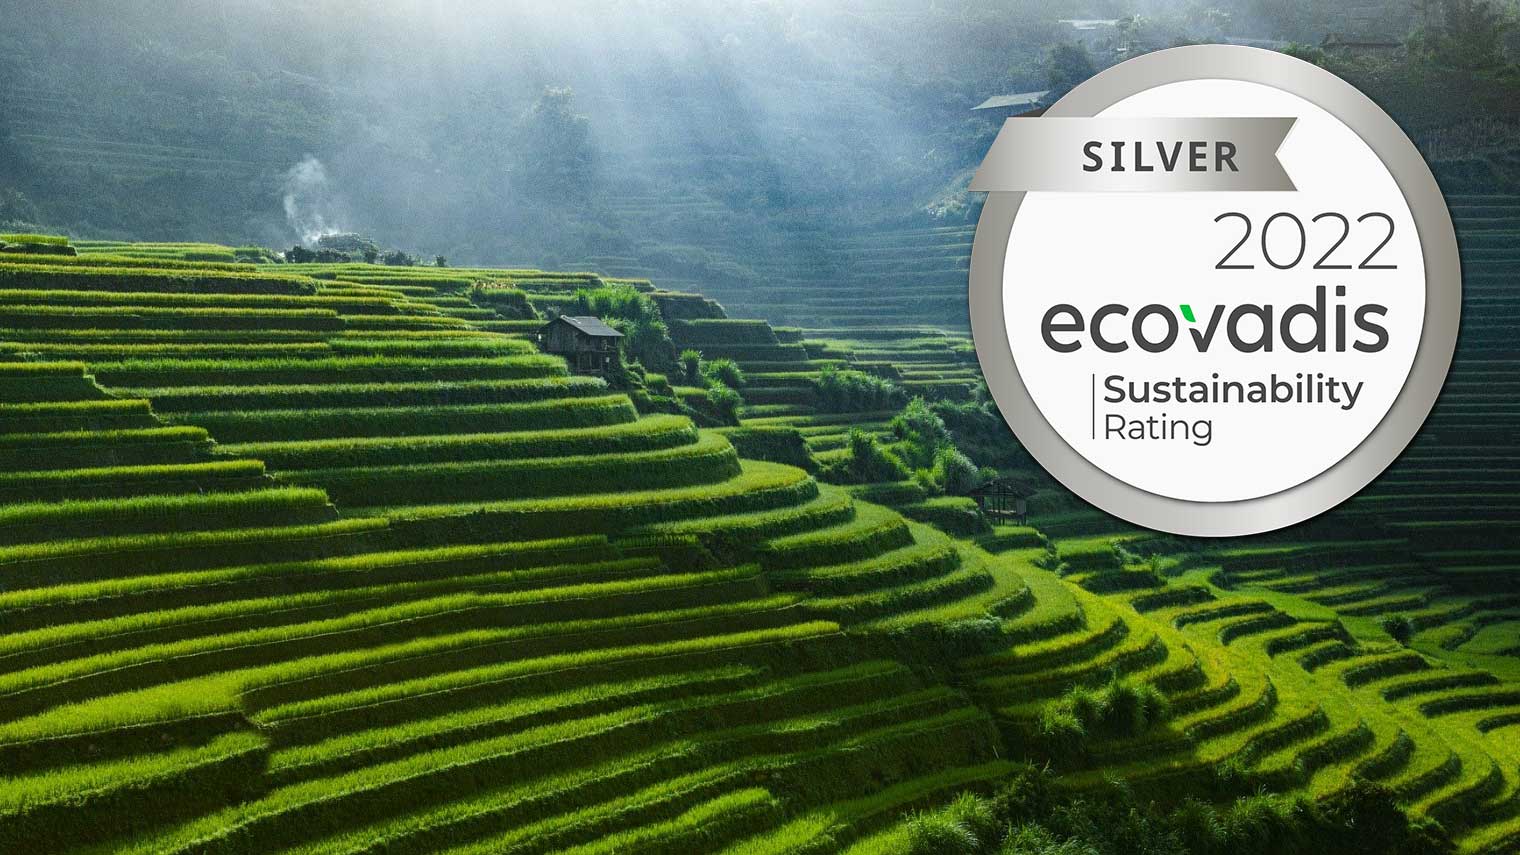 Rice fields and EcoVadis silver medal